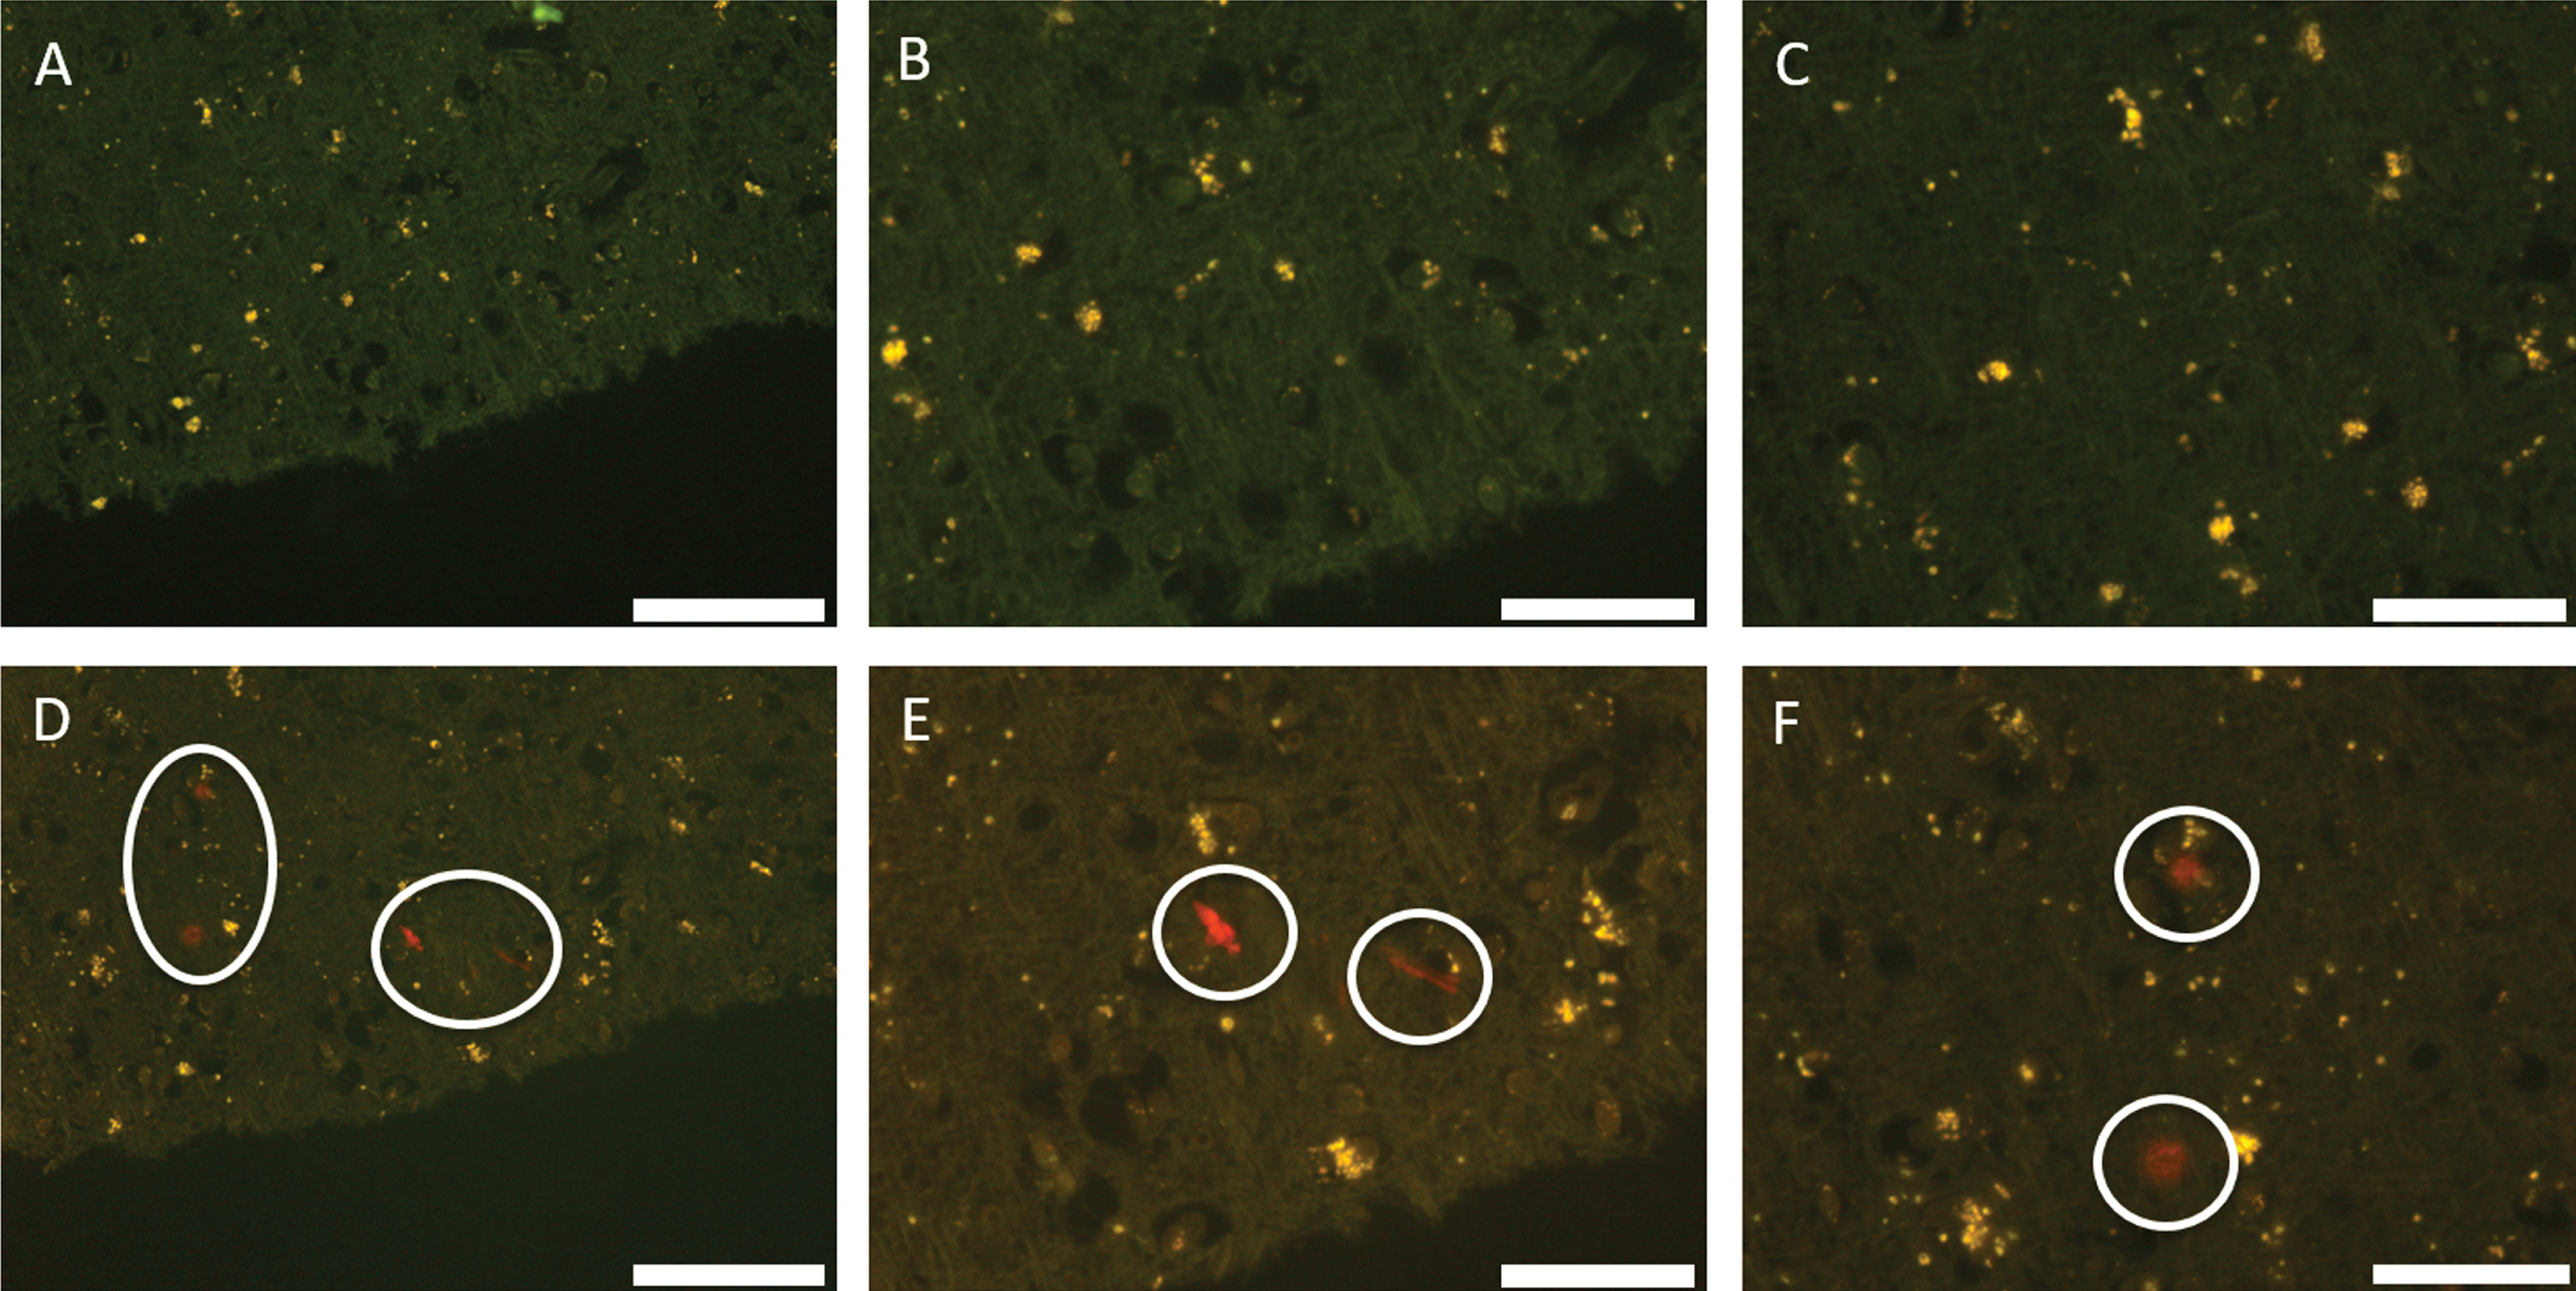 Autofluorescence (A–C) and fluorescence (D–F) images of occipital lobe stained with lumogallion. Significant deposits of aluminum showing strong positive fluorescence are circled. Scale bar is 100 μm (A and D) and 50 μm (B, C, E, F).